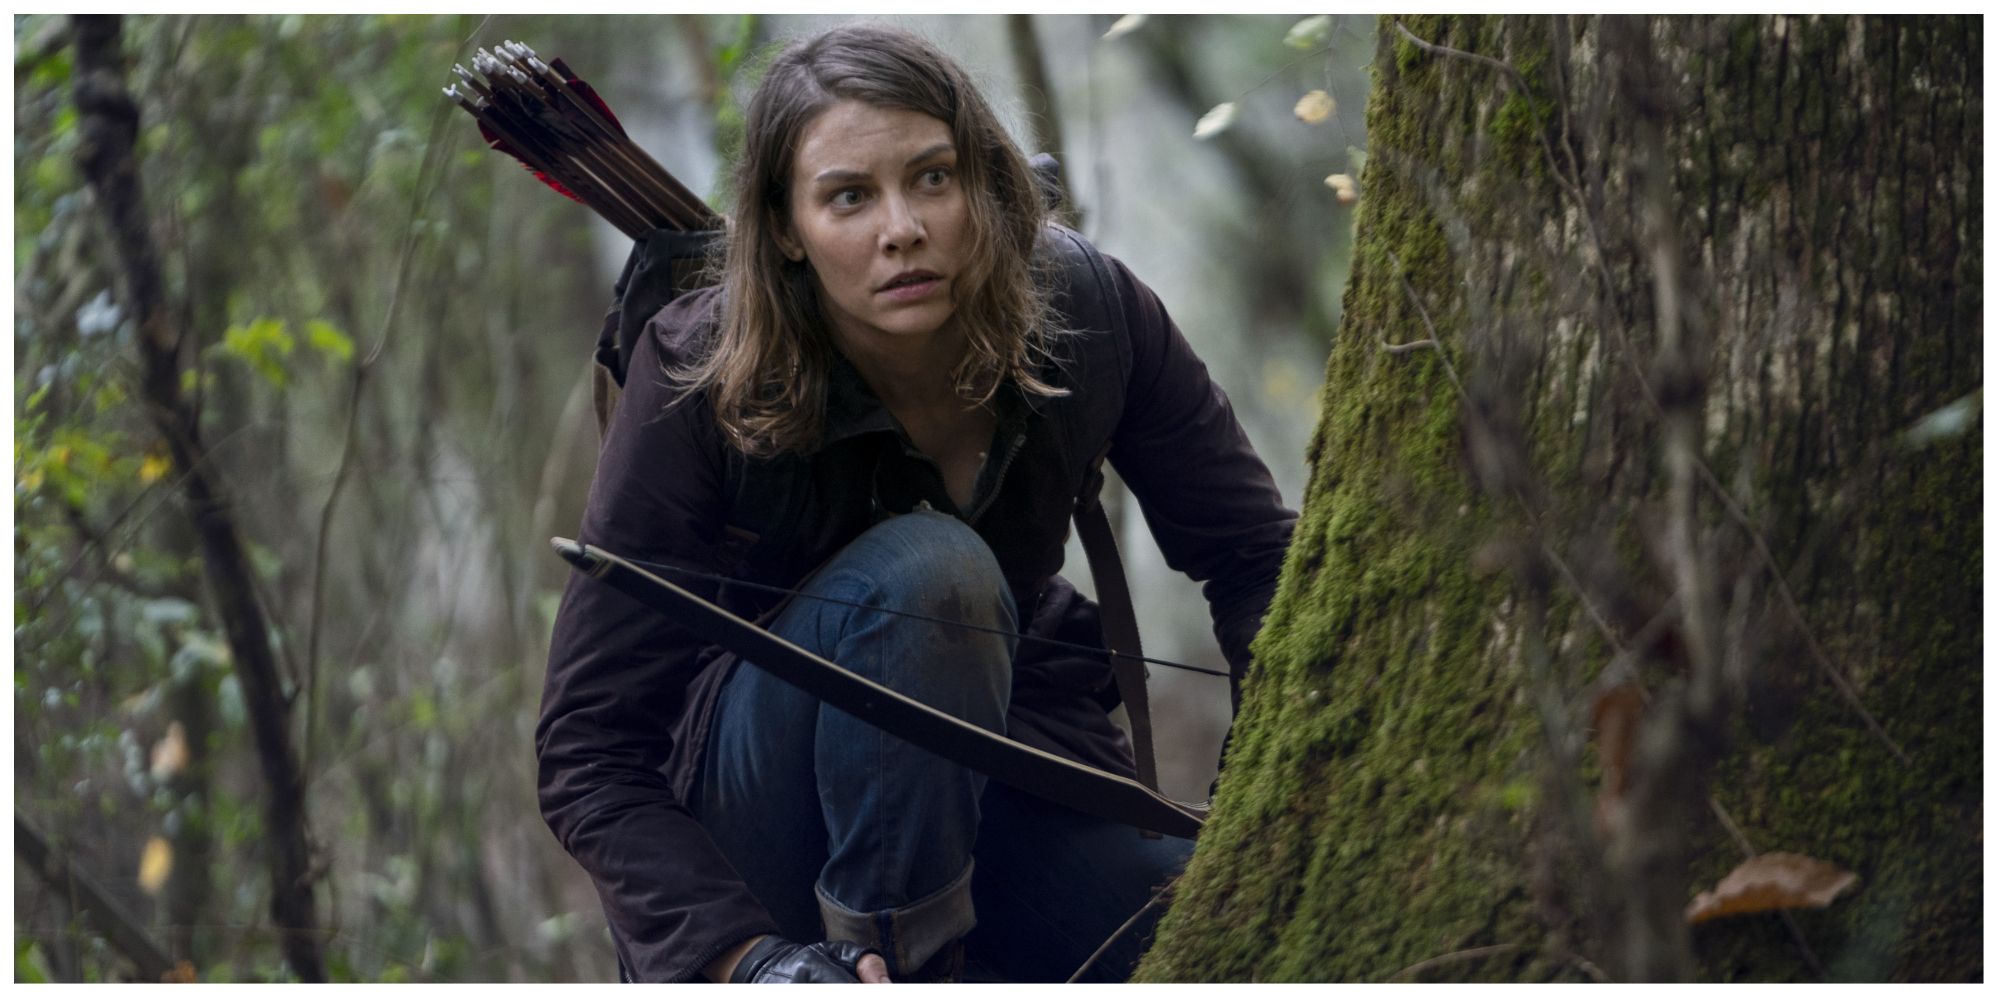 Maggie from The Walking Dead crouching behind a tree with a bow and arrow